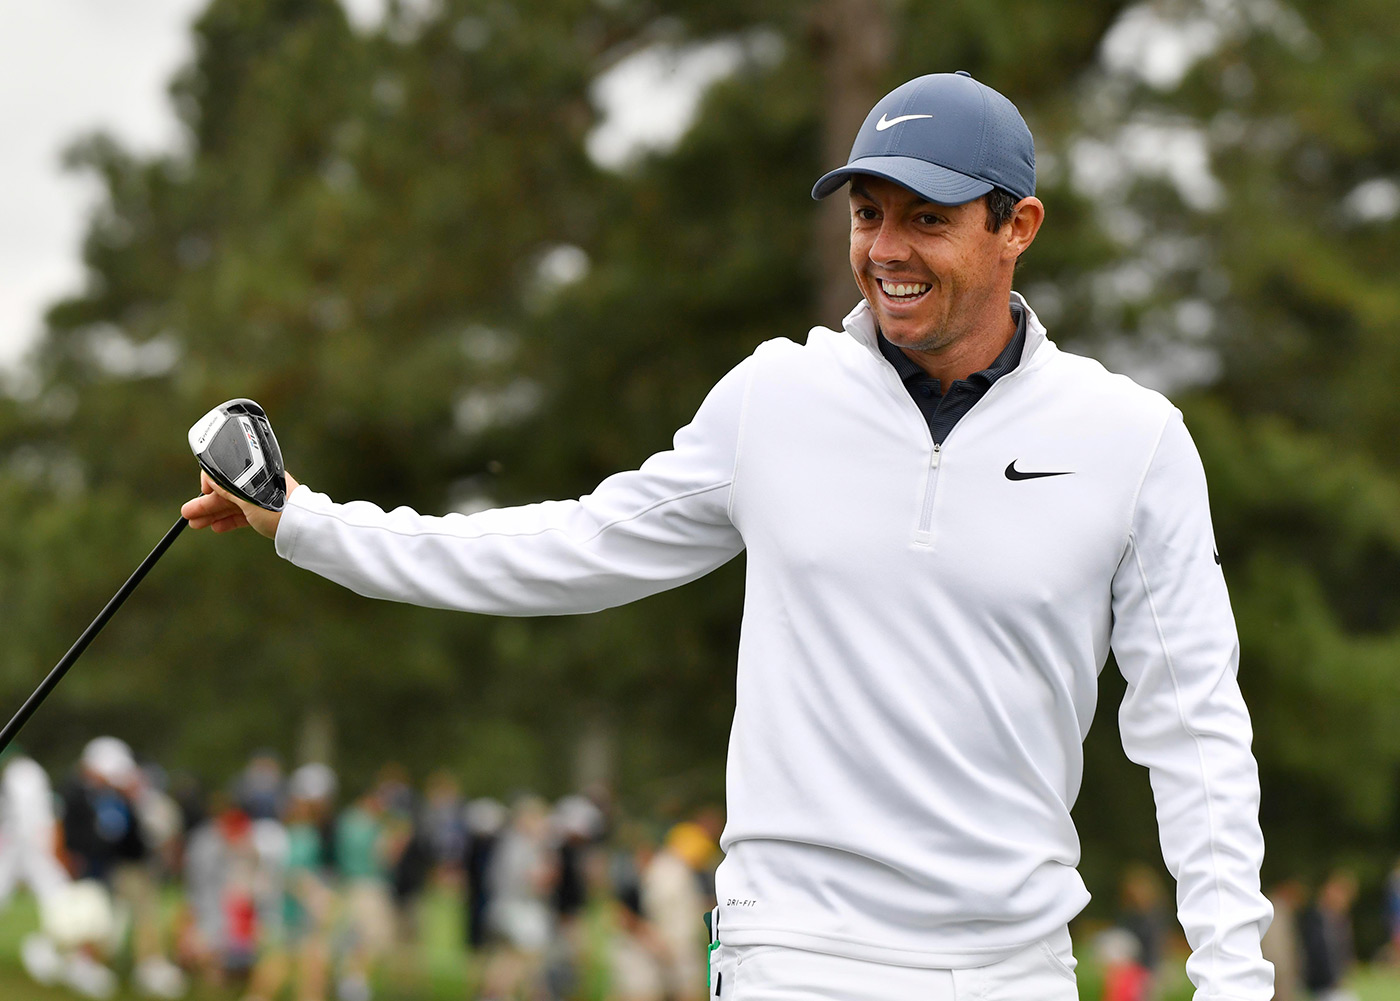 Rory McIlroy's scoring average at the Masters surprised even him